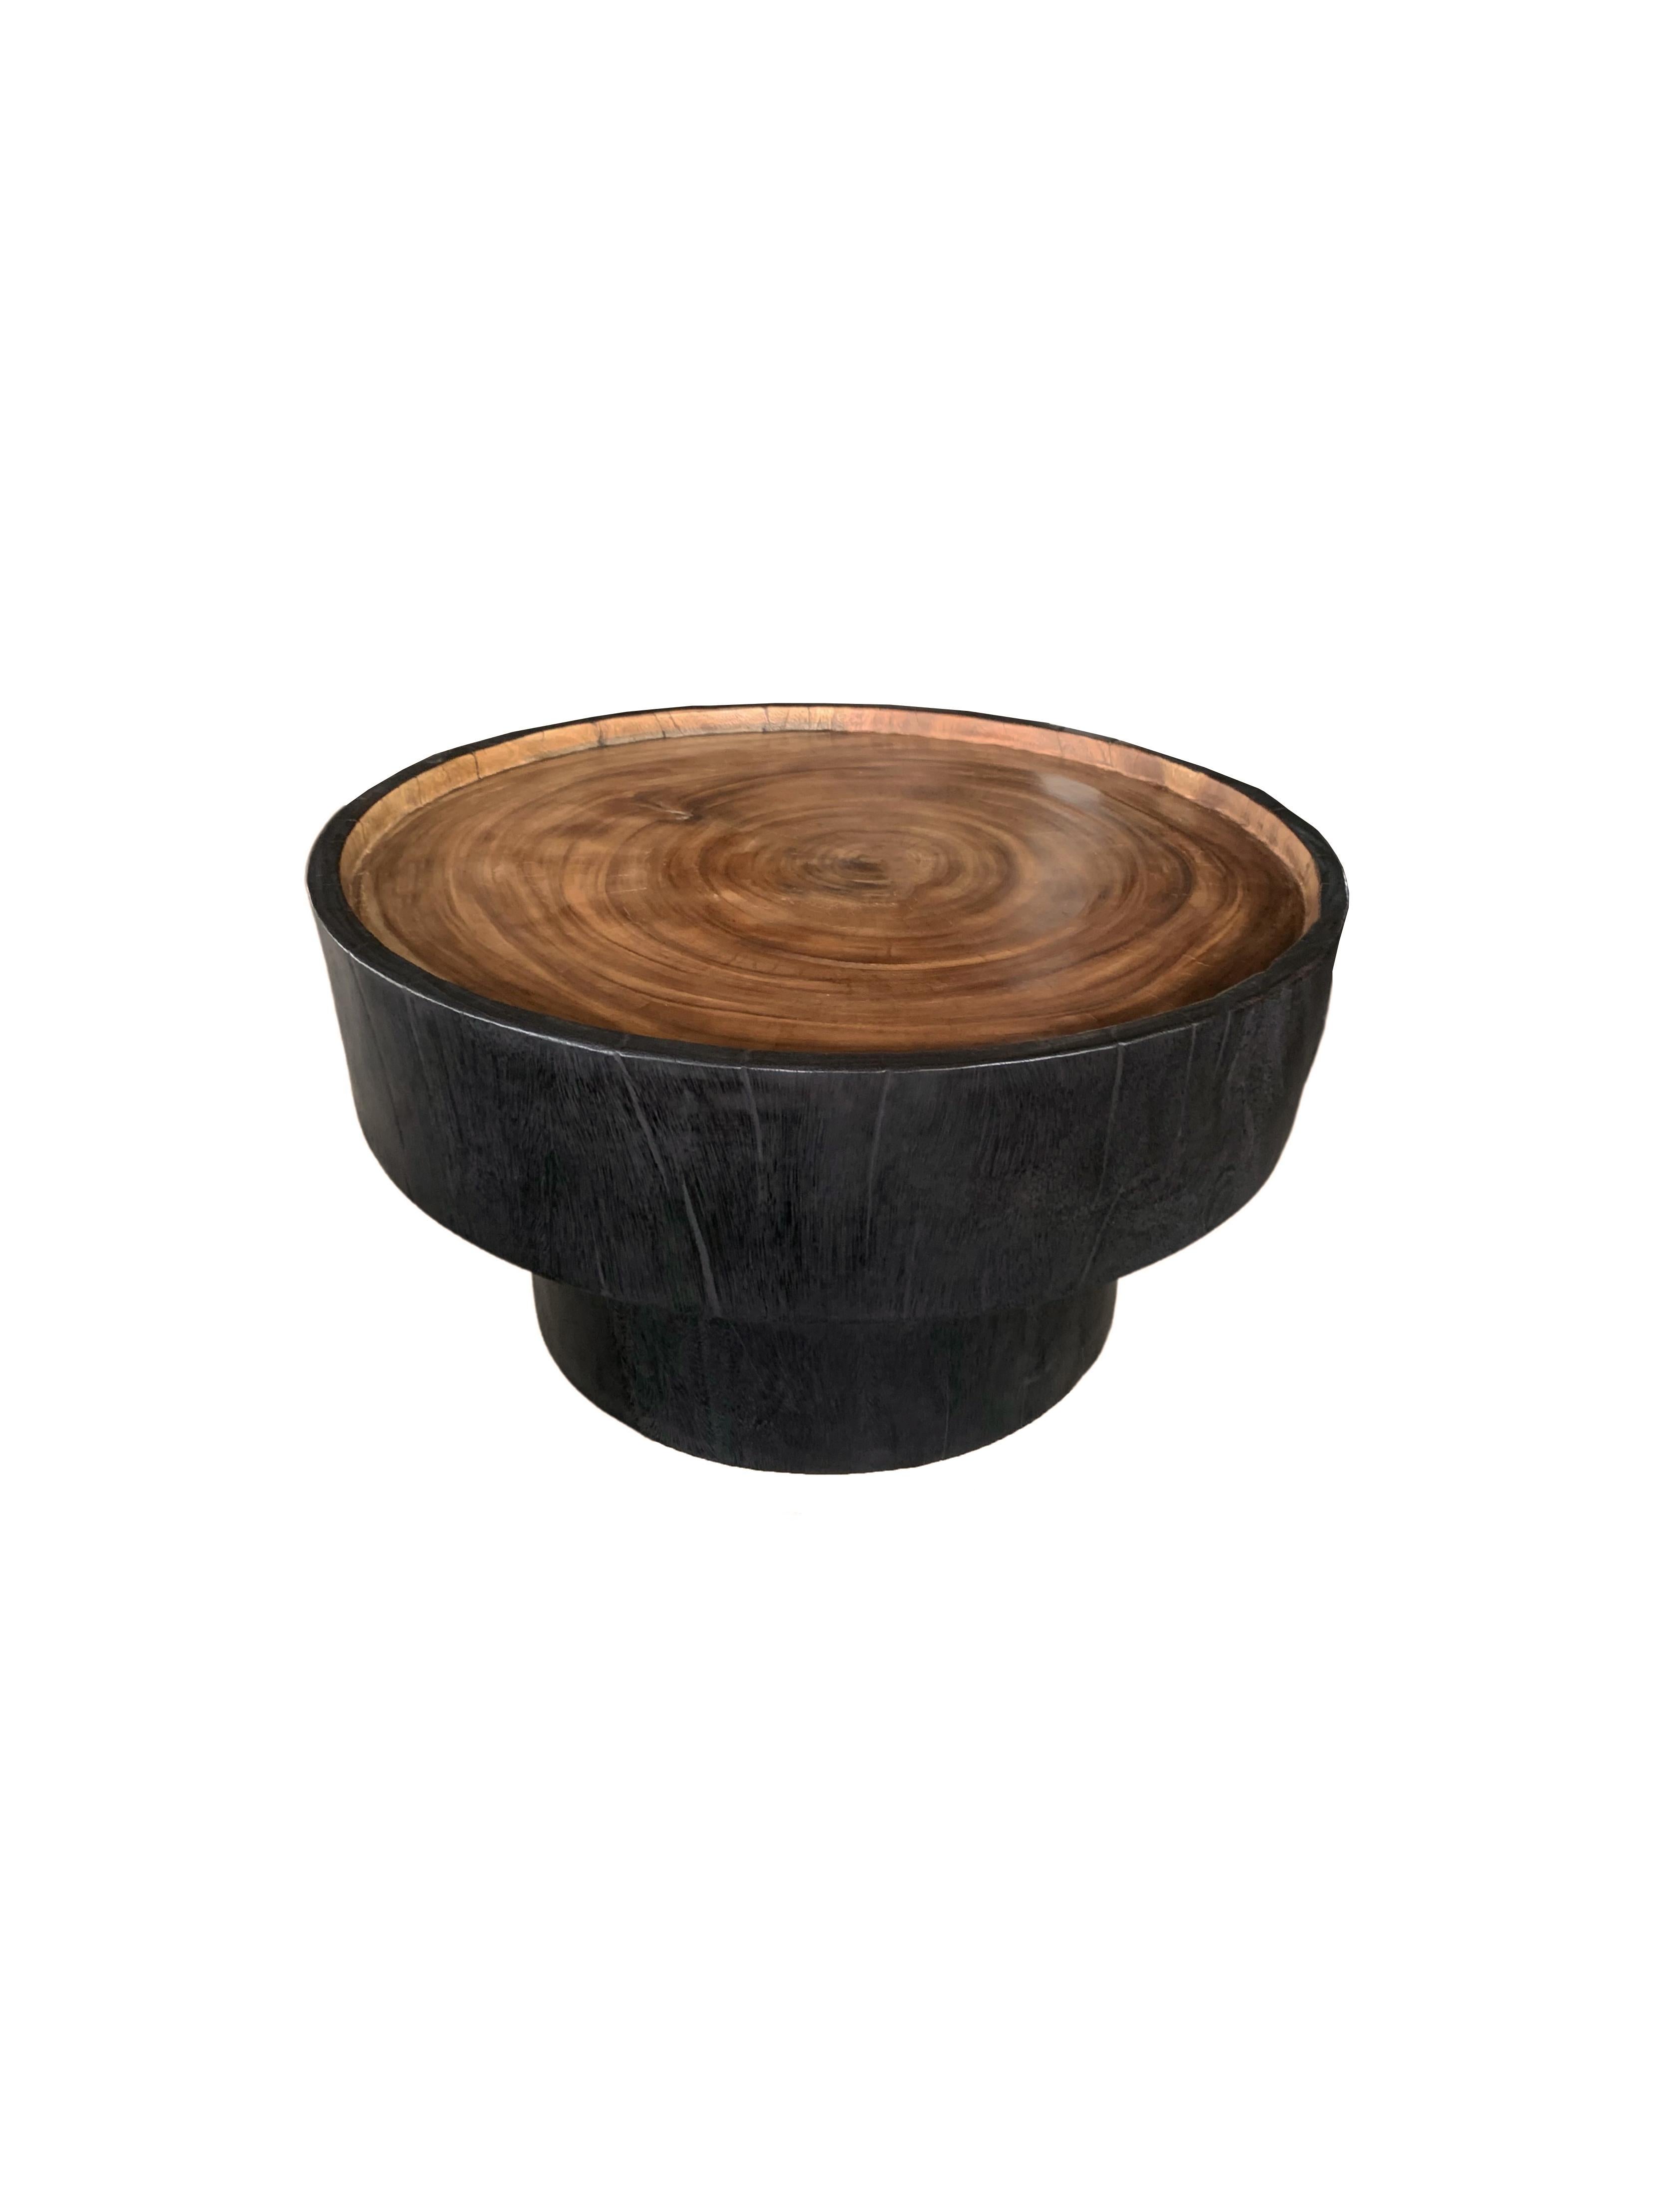 A wonderfully sculptural round side table. Its neutral pigment and subtle wood texture makes it perfect for any space. A uniquely sculptural and versatile piece. This table was crafted from mango wood and has a smooth texture. It features a contrast